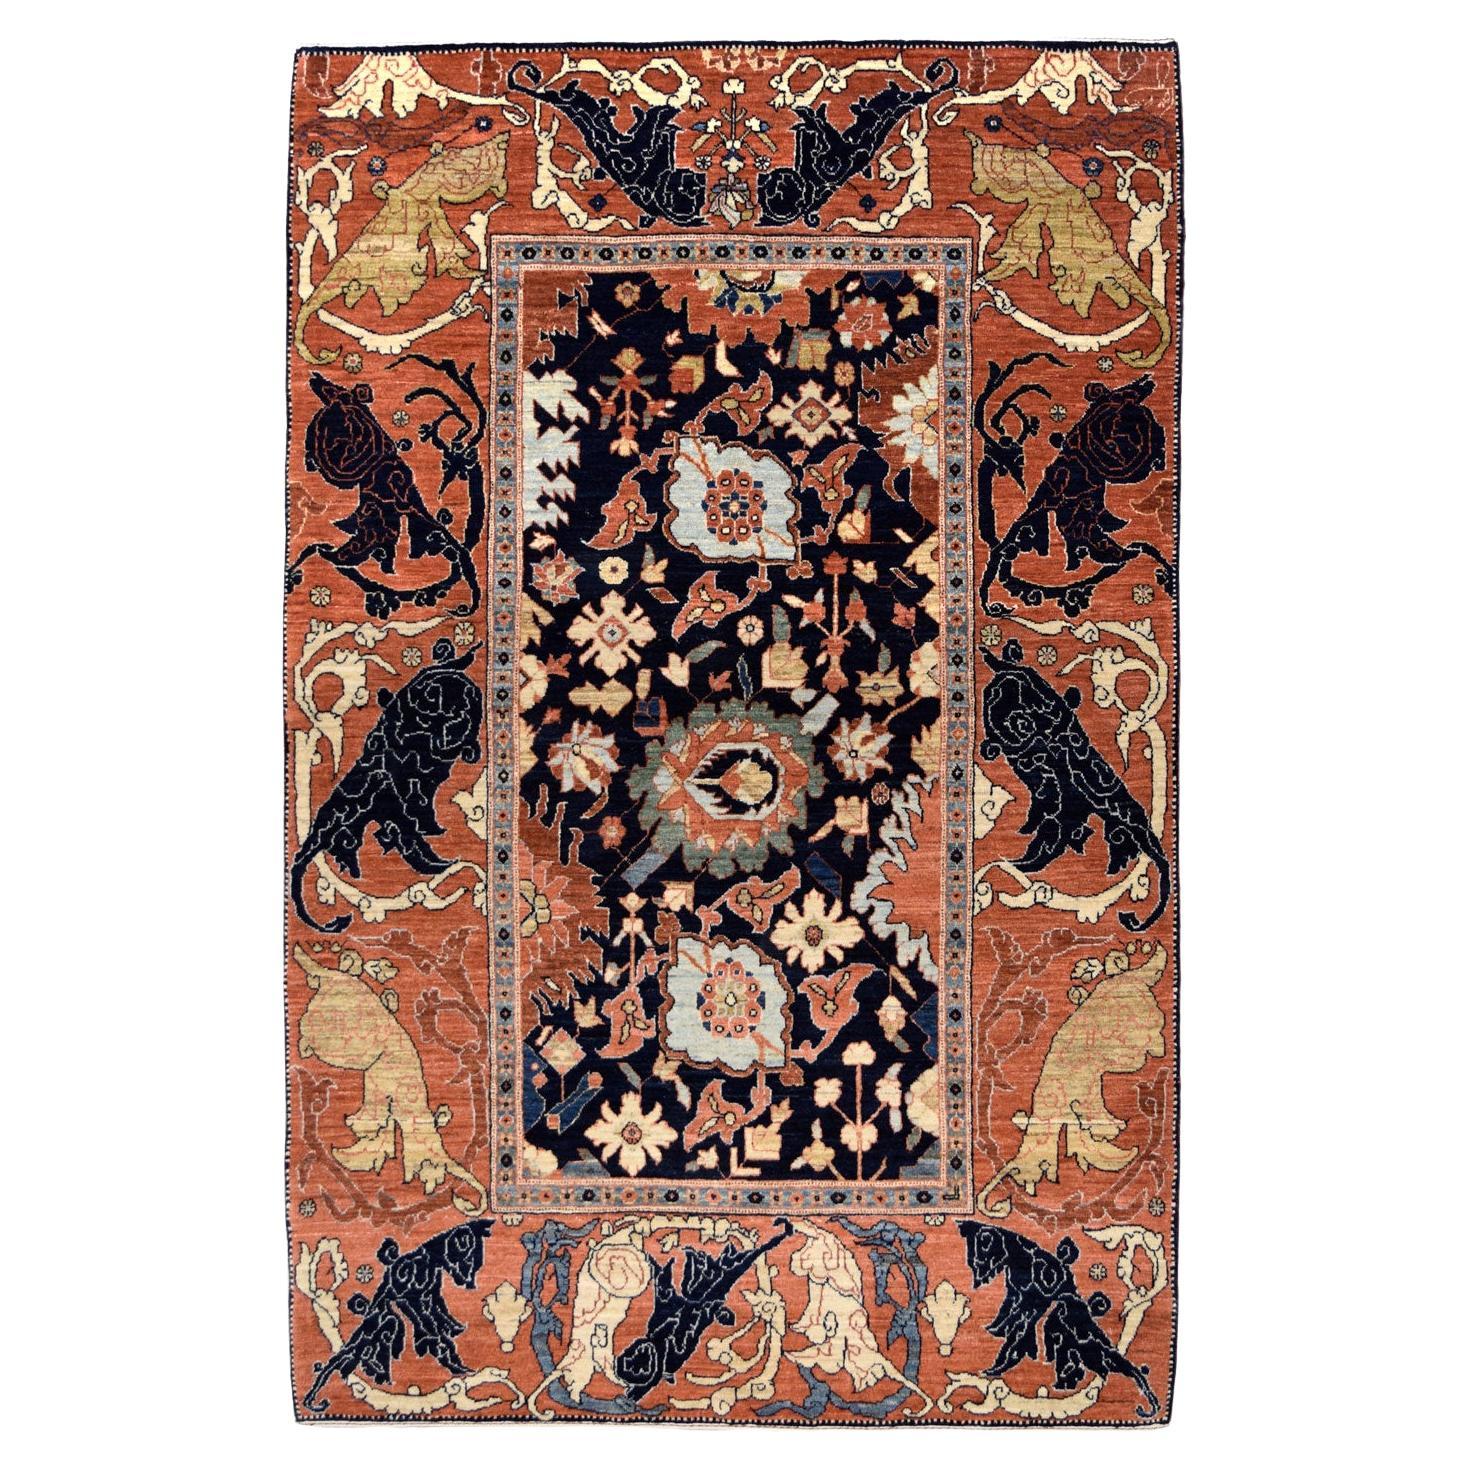 Wool, Hand-knotted Transitional Persian Bakhshaysh Rug, Multicolored, 4' x 6'